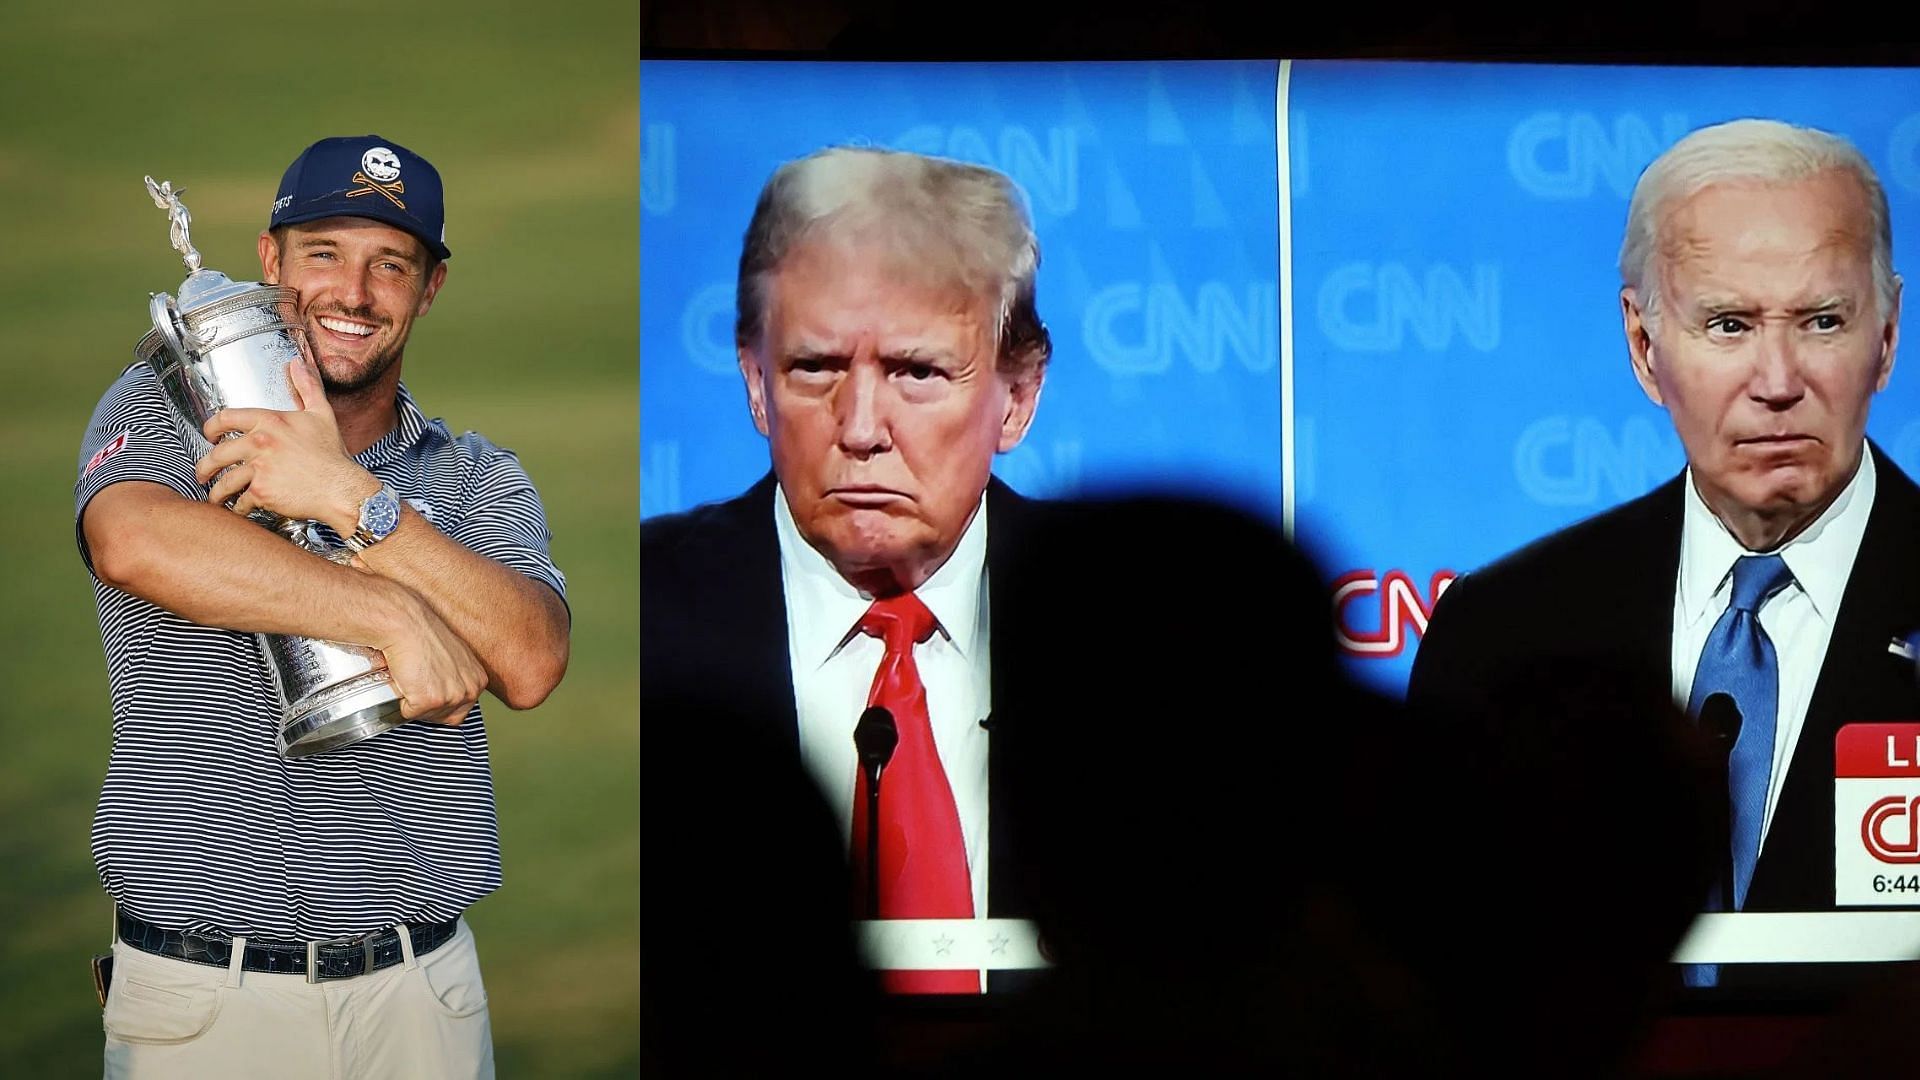 Bryson DeChambeau (L), Donald Trump and Joe Biden during Presidential debate (Images: All from Getty) 